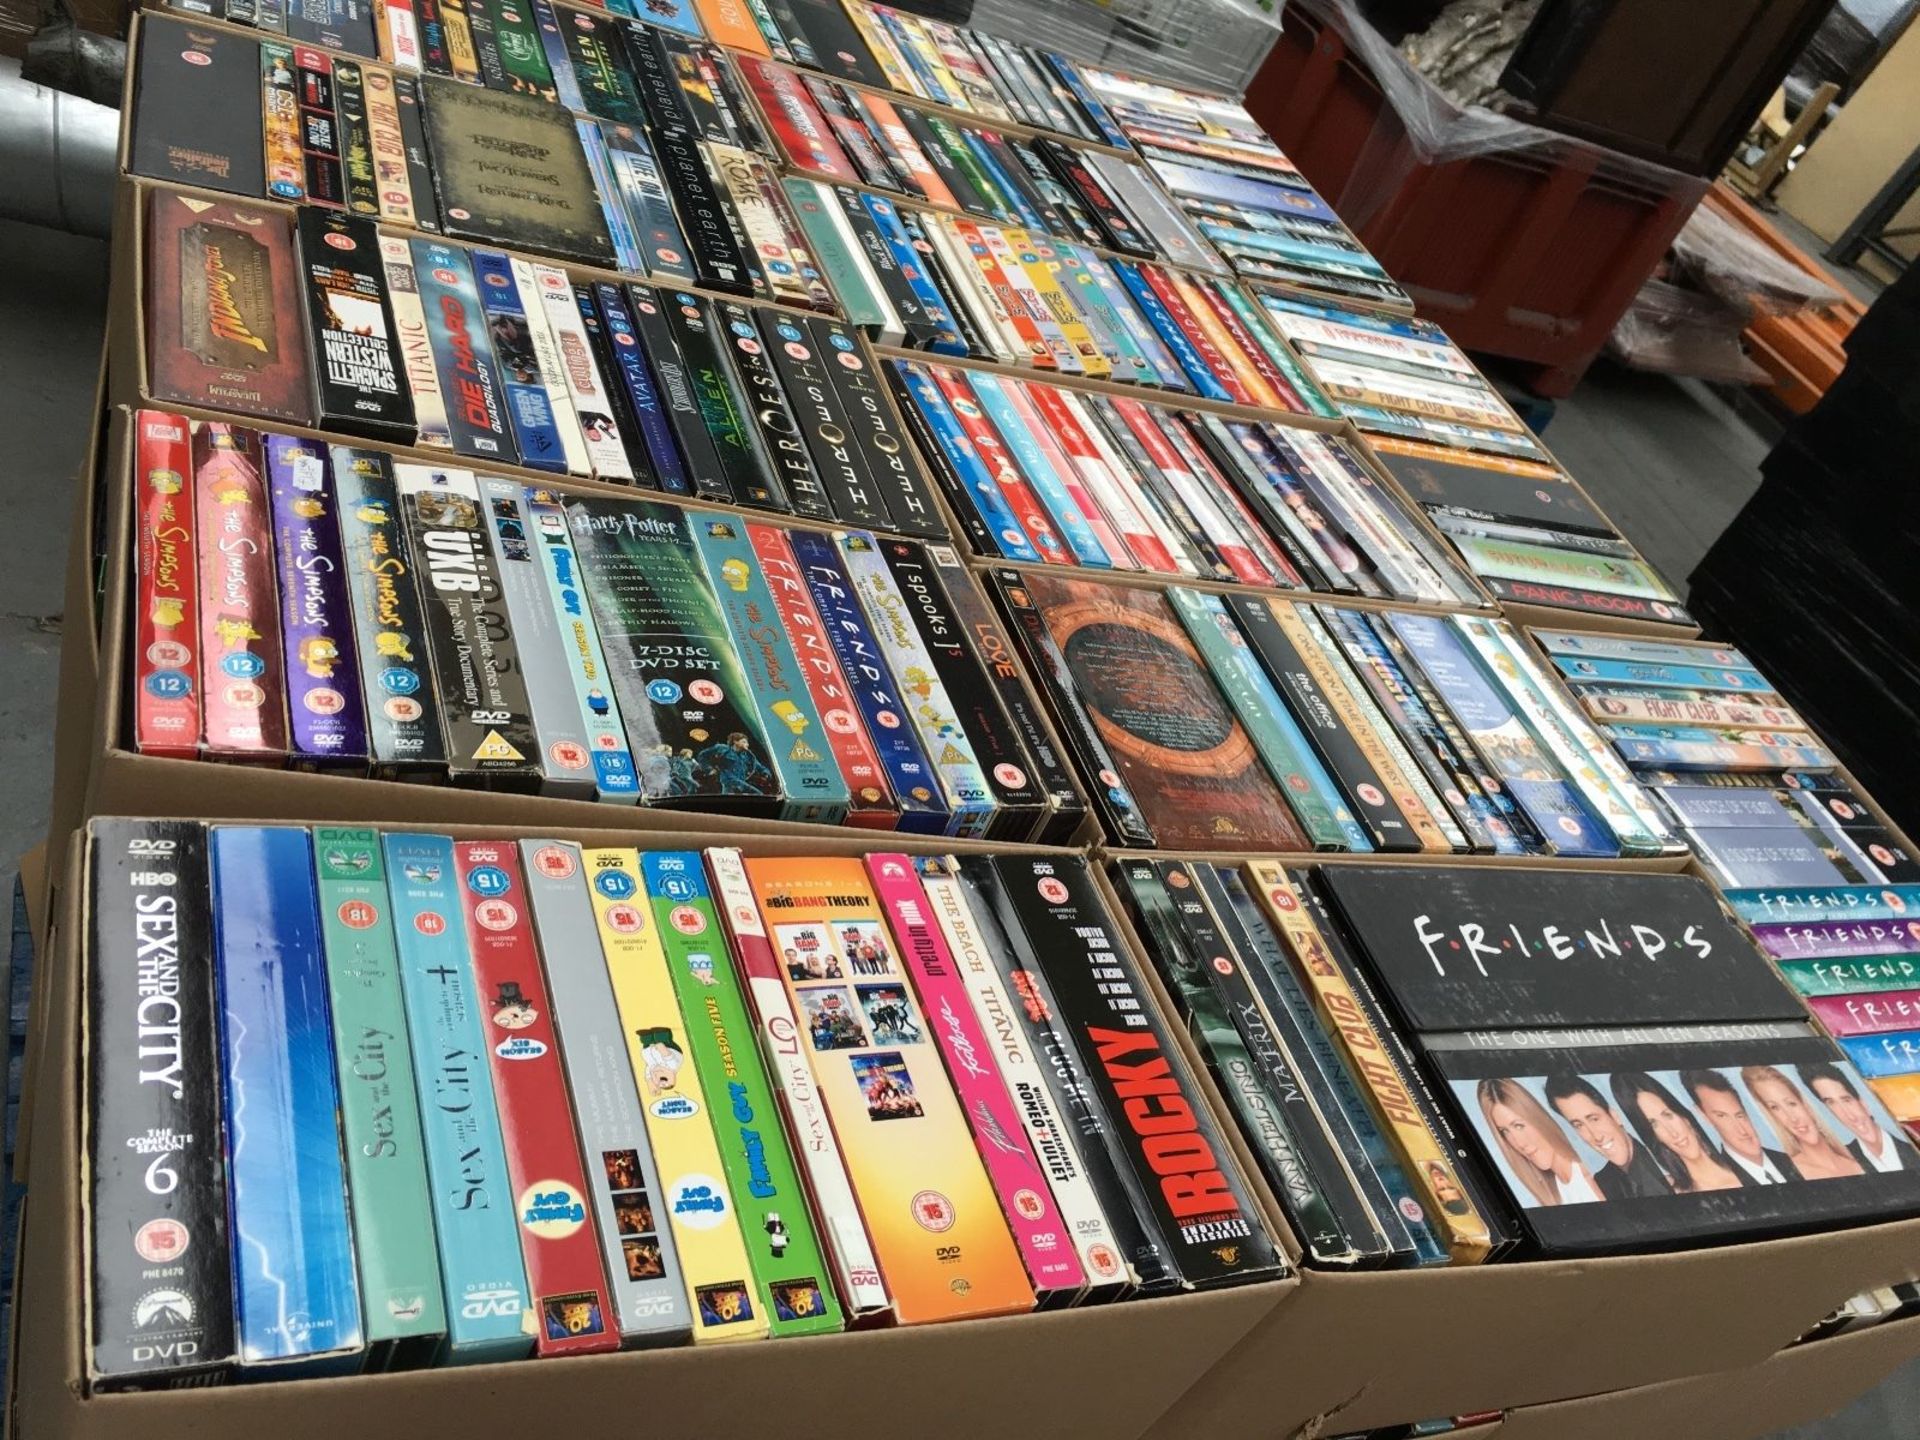 No Reserve 2900 x VARIOUS DVD'S - REGION 2 - VARIOUS TITLES - VARIOUS CONDITIONS - NO RESERVE!! - Image 3 of 4